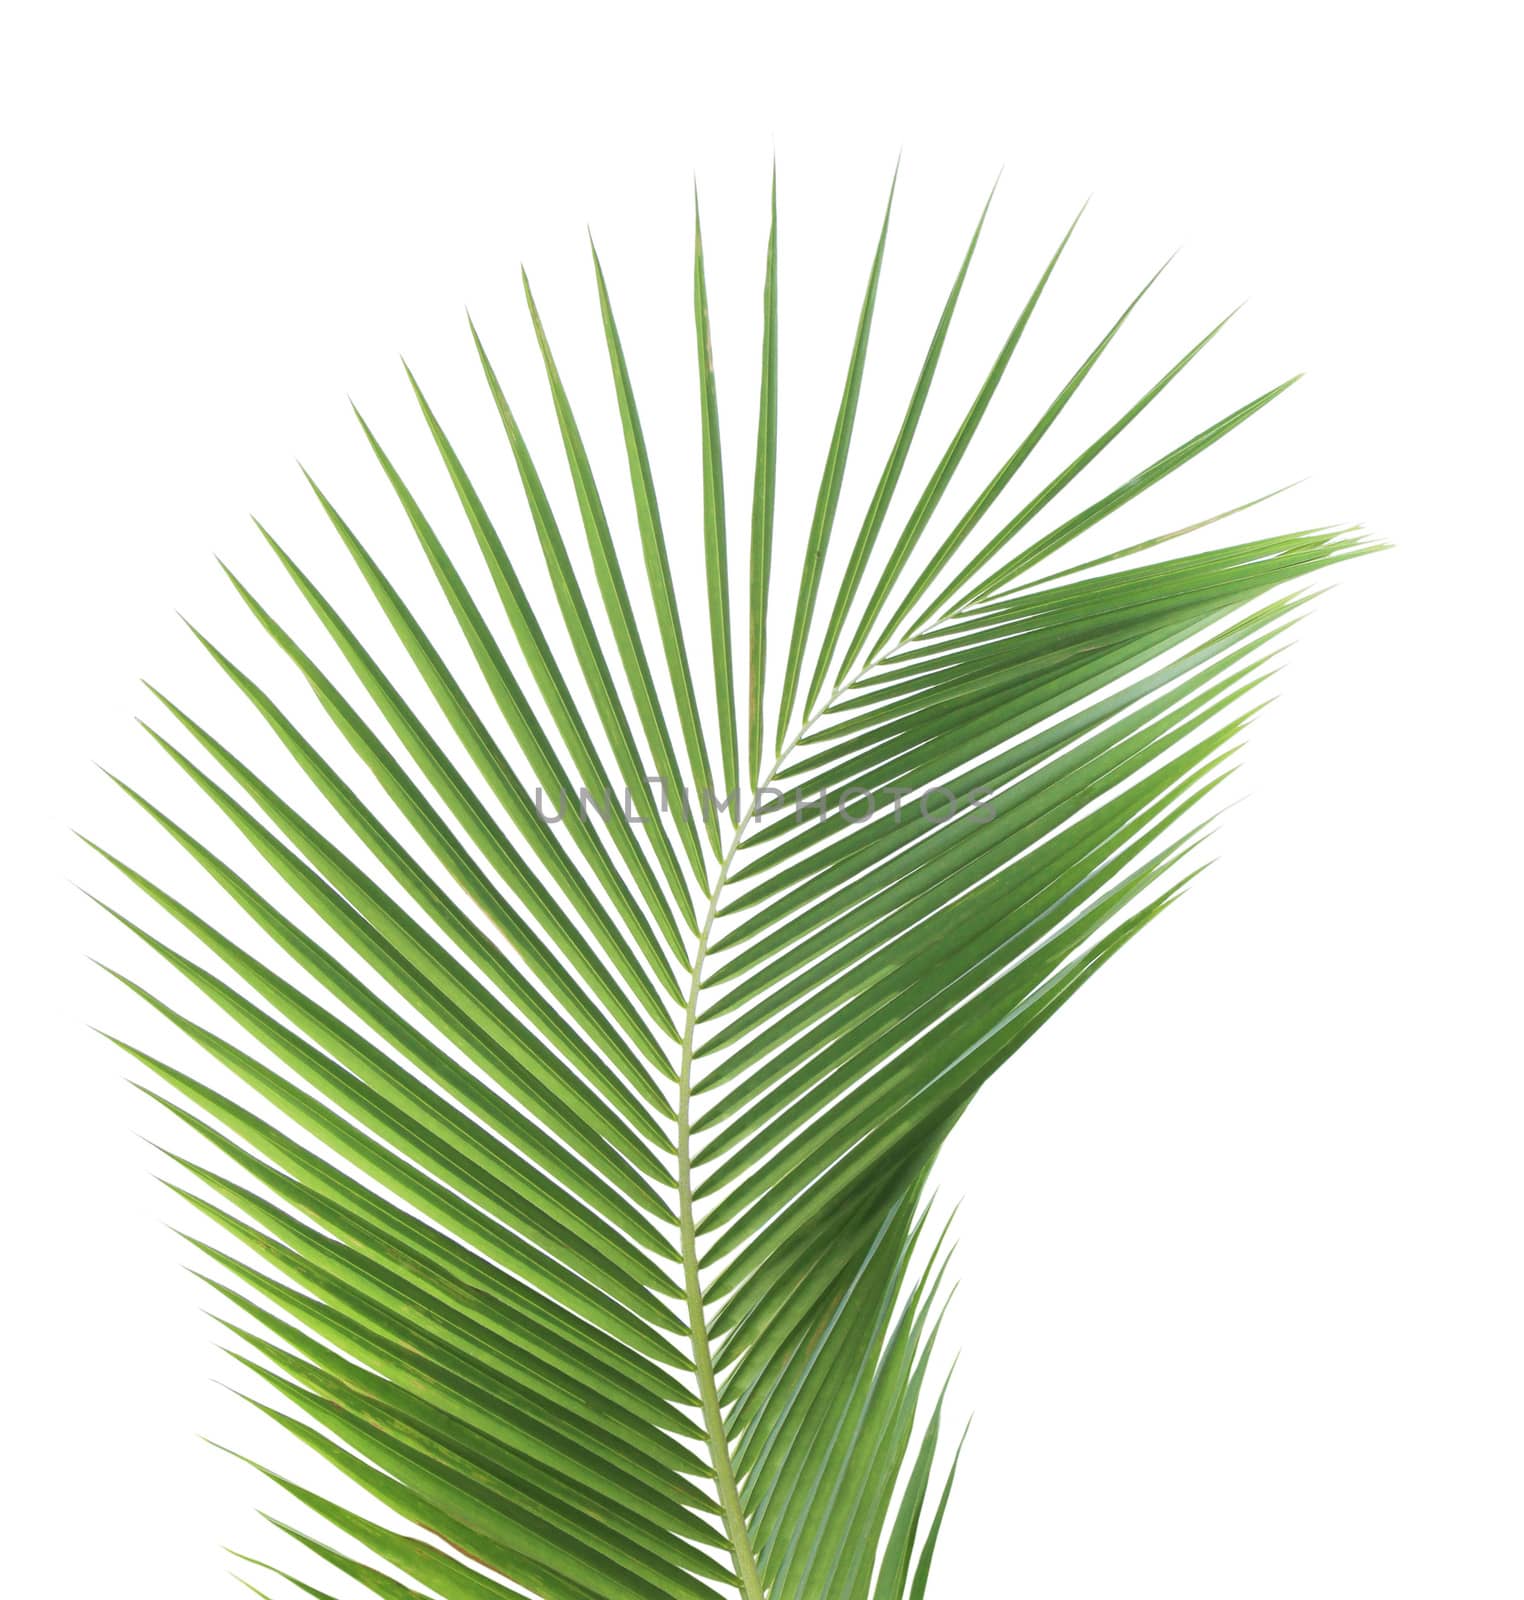 Green coconut leaf isolated on white background by drpnncpp